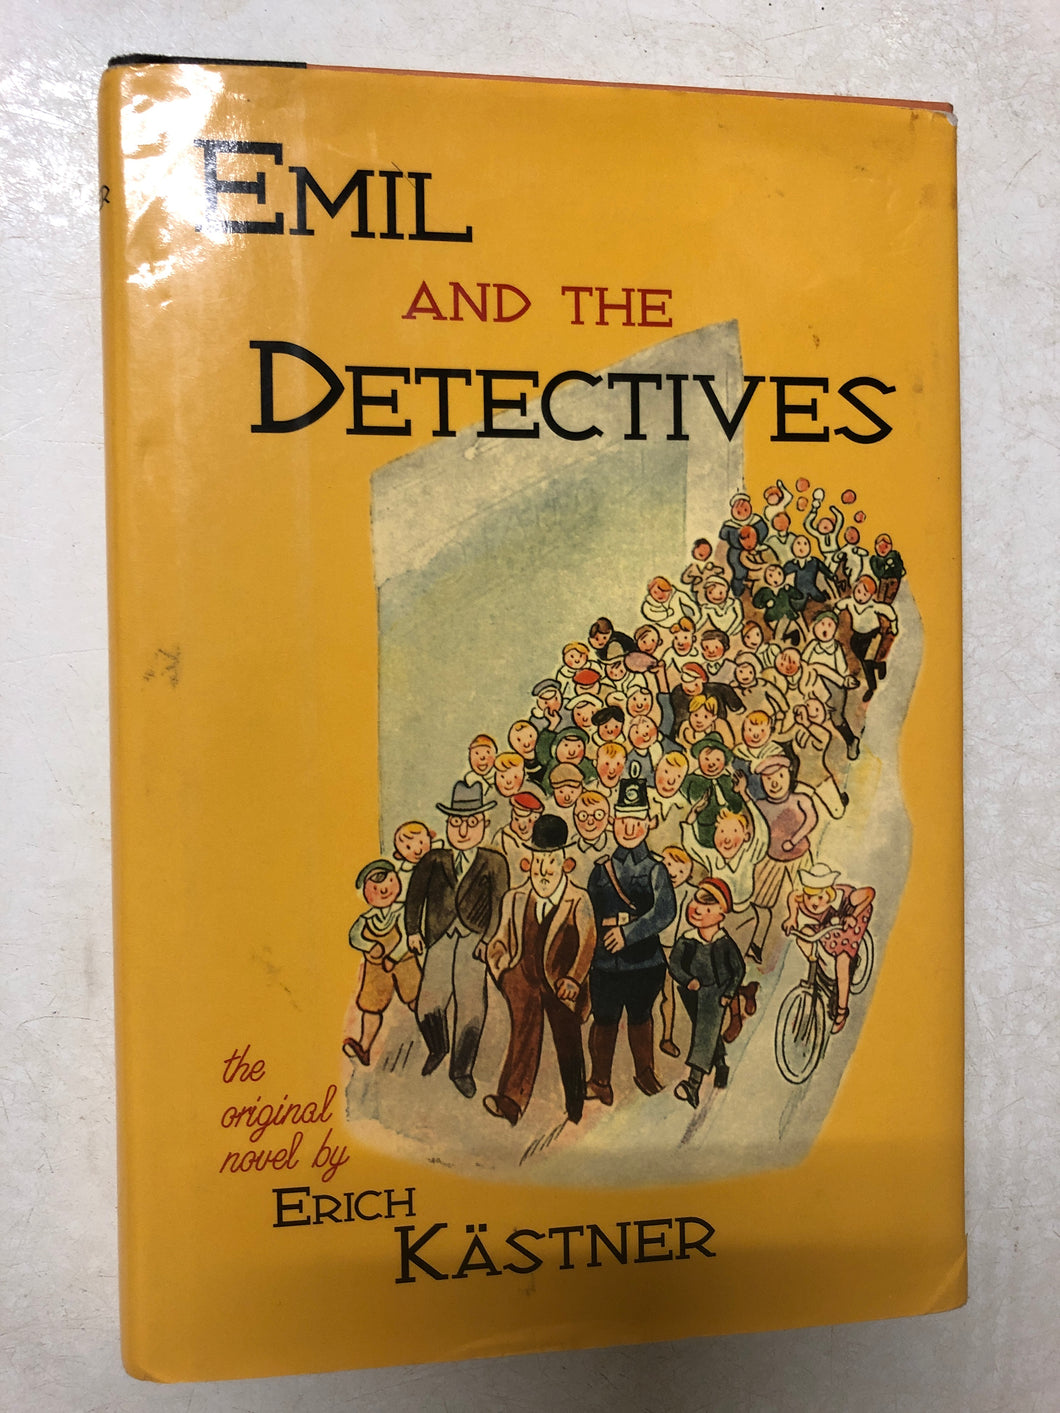 Emil and the Detectives - Slick Cat Books